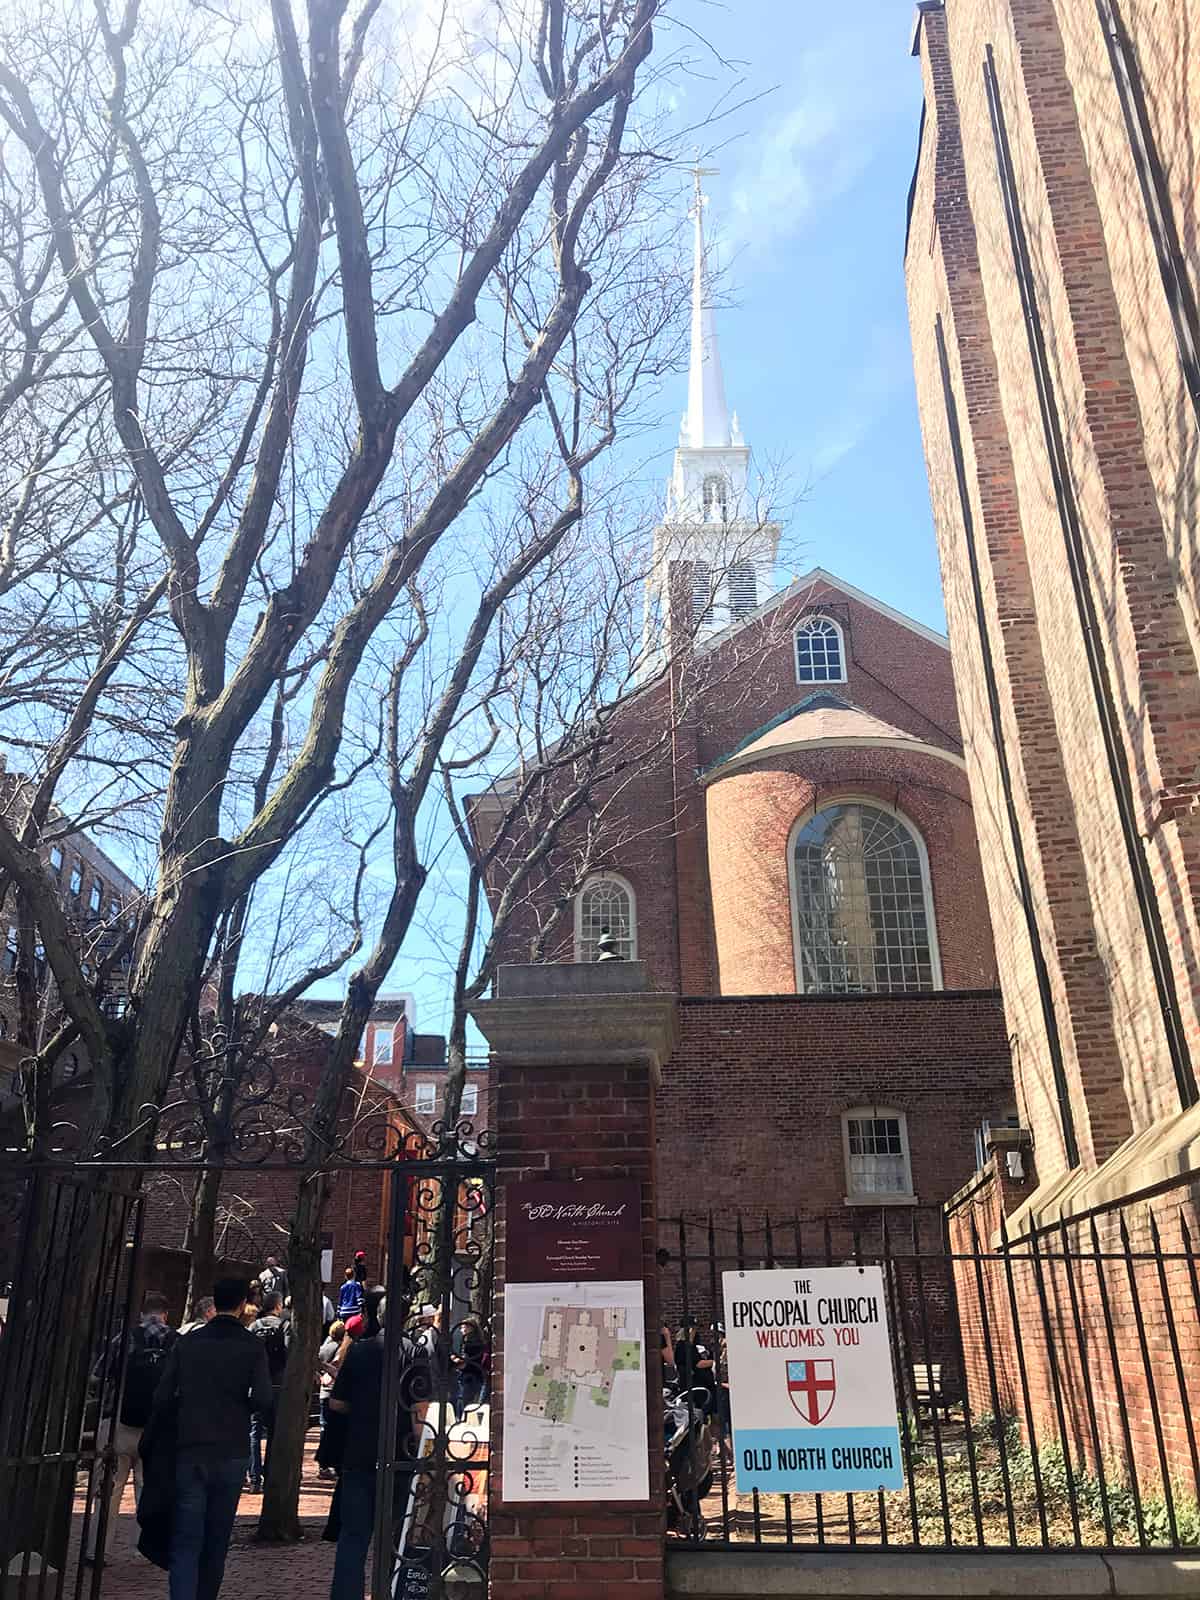 The Old North Church in Boston's North End - popular on tours